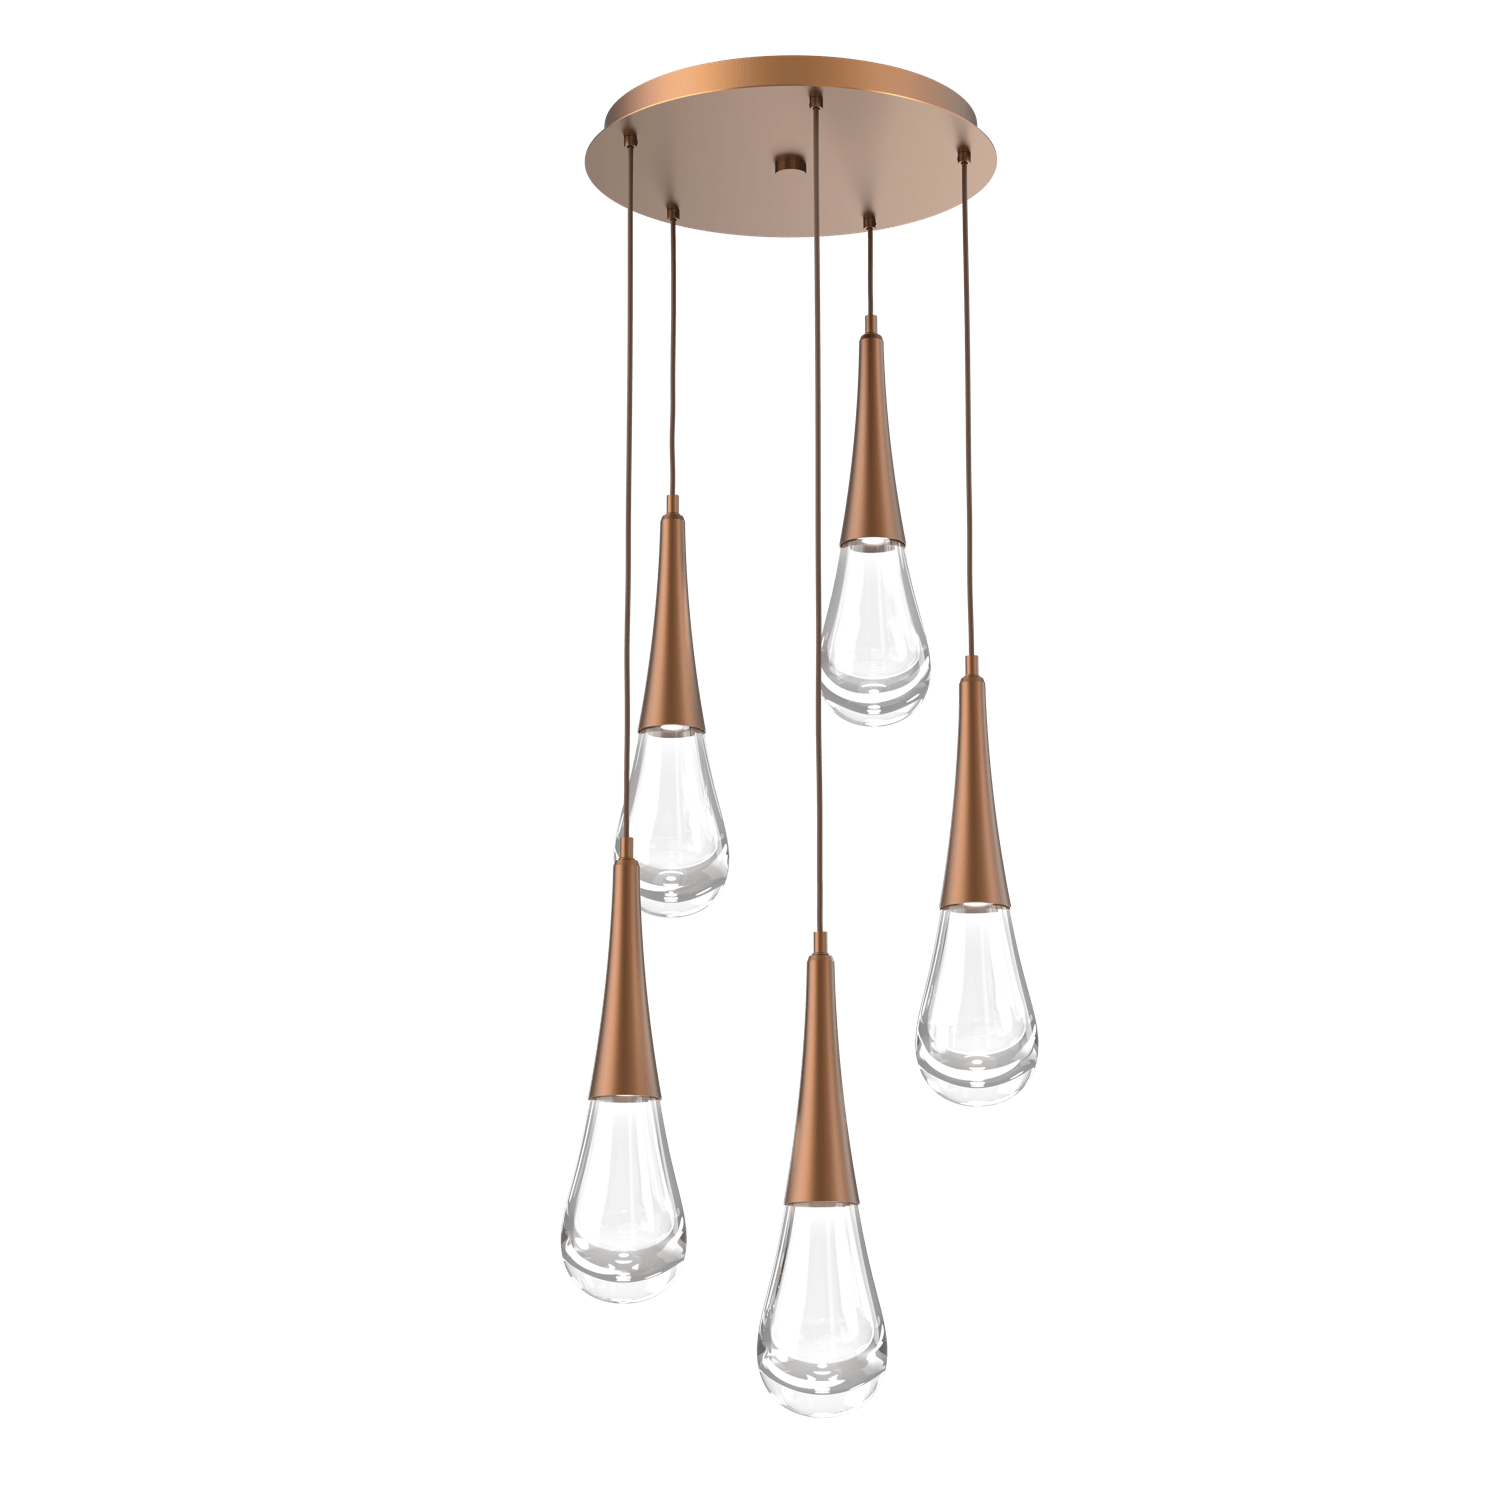 CHB0078-05-BB-Hammerton-Studio-Raindrop-5-light-round-pendant-chandelier-with-burnished-bronze-finish-and-clear-blown-glass-shades-and-LED-lamping